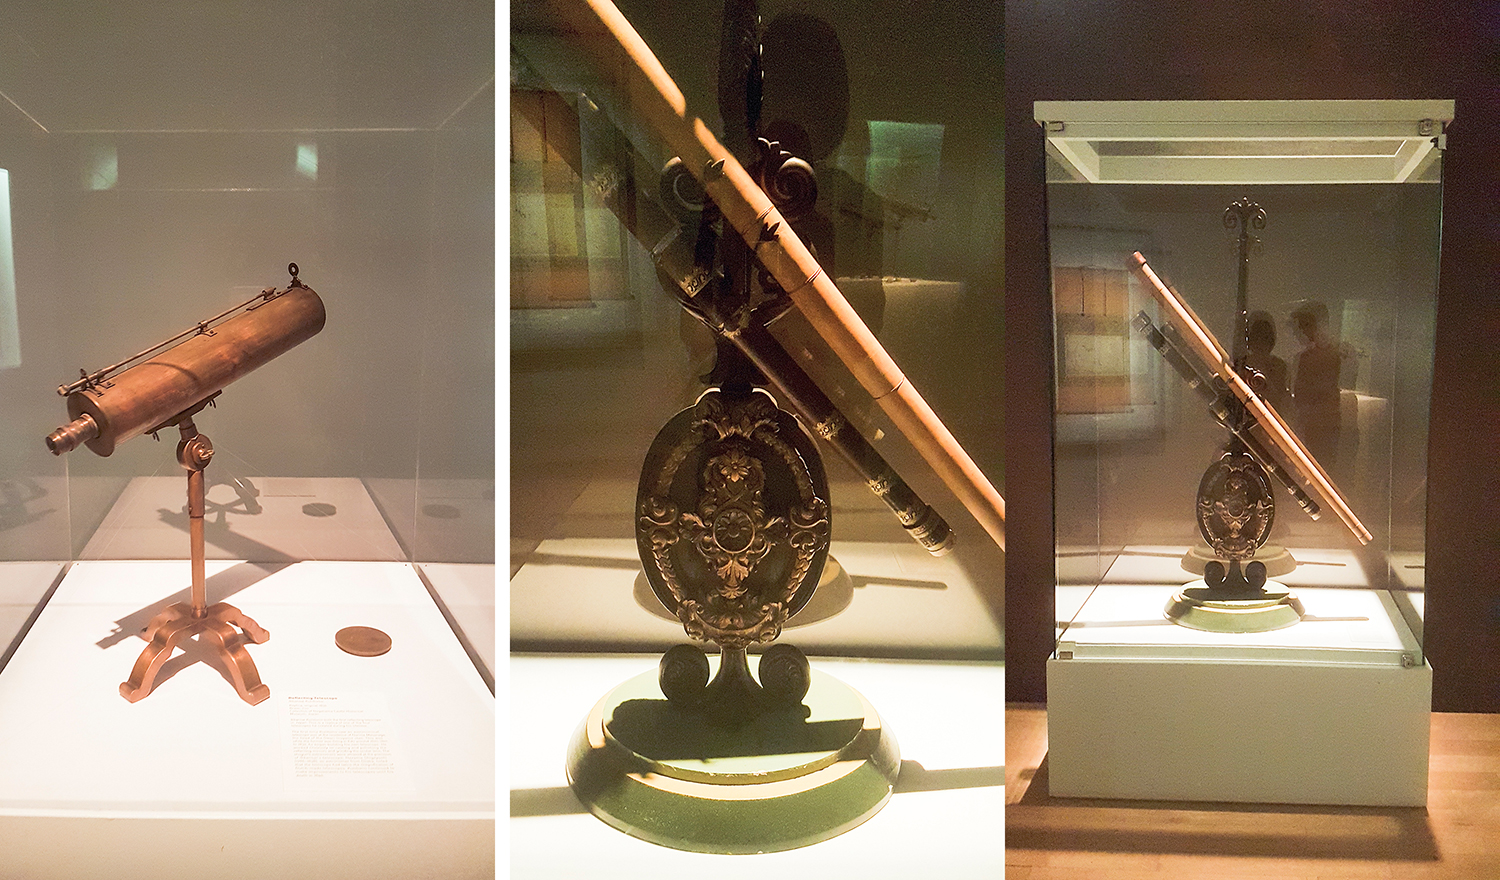 Replica of the Reflecting Telescope by Ikkansai Kunitomo and a replica of Galileo Galilei's telescope on display at the The Universe and Art: An Artistic Voyage Through Space exhibition, ArtScience Museum Singapore.